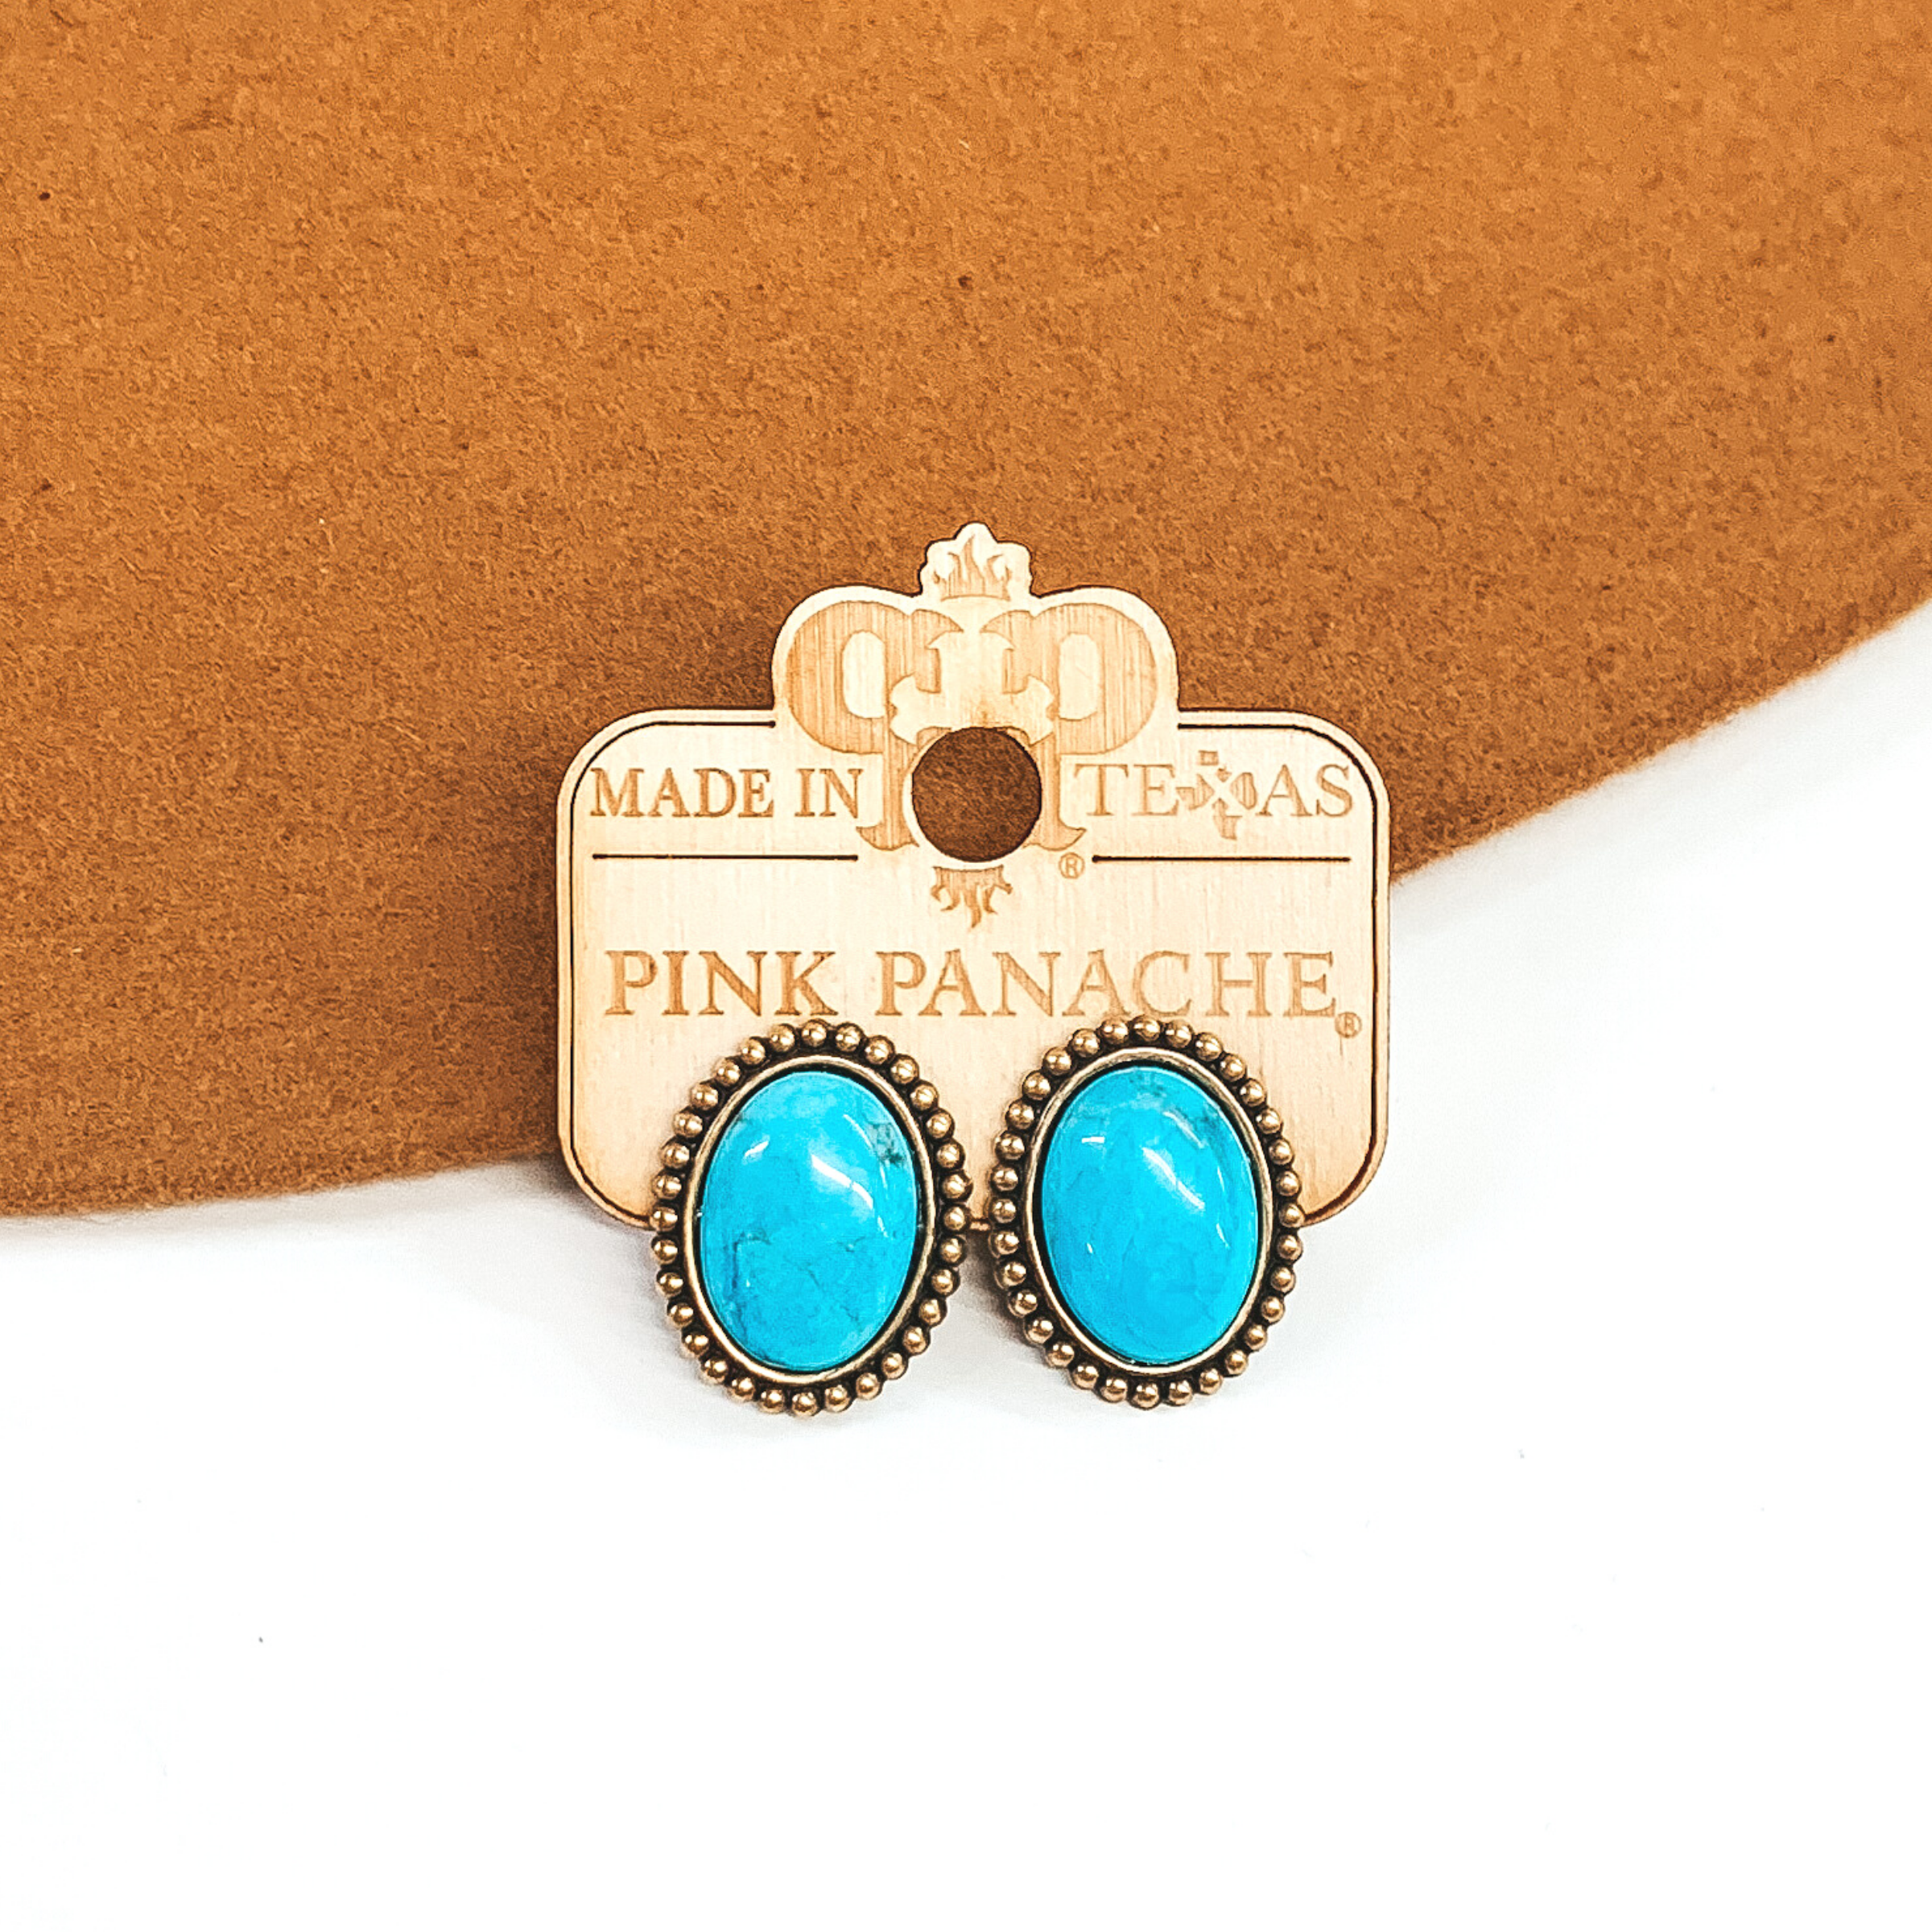 Bronze set earrings with tiny bronze beads surrounding the outside of the earrings. There is a center oval turquoise stone. These earrings are on a camel colored and white background. 